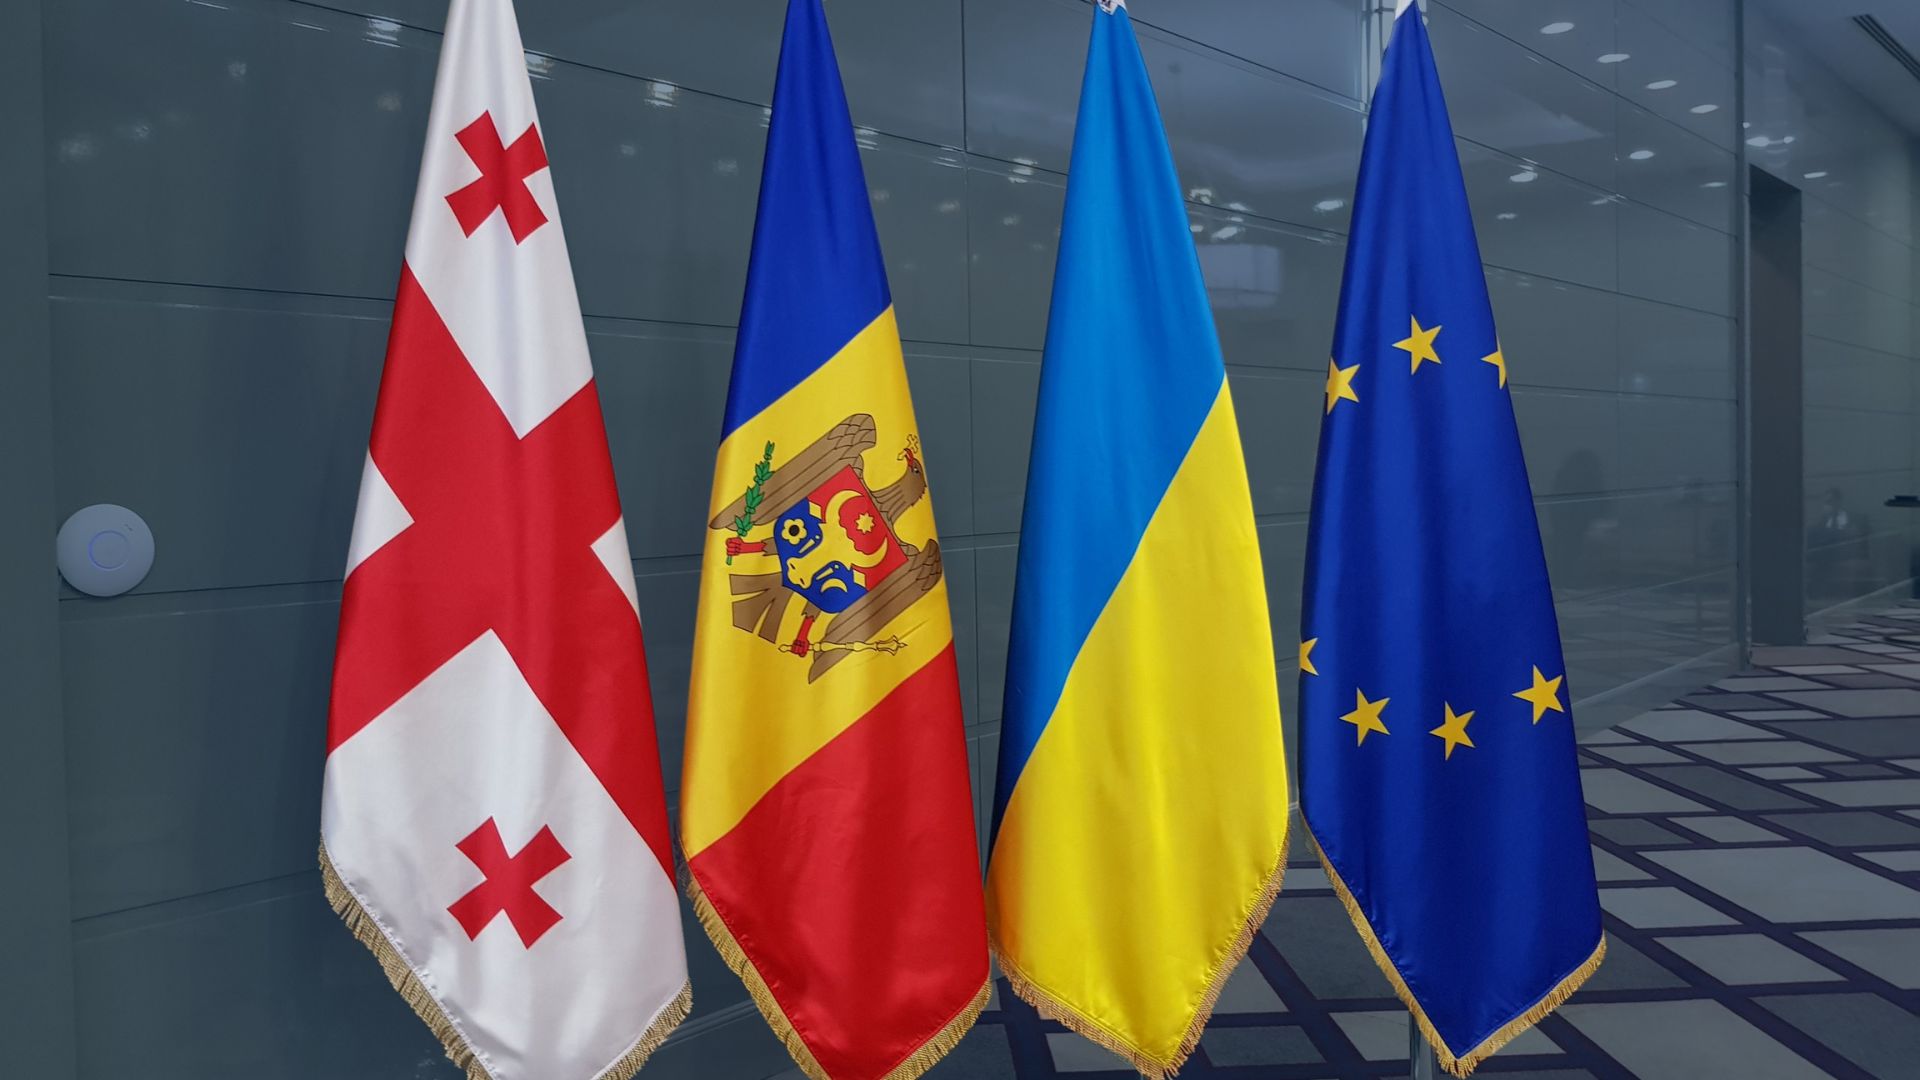 EU Commission Set to Recommend Formal Membership Negotiations for Ukraine and Moldova